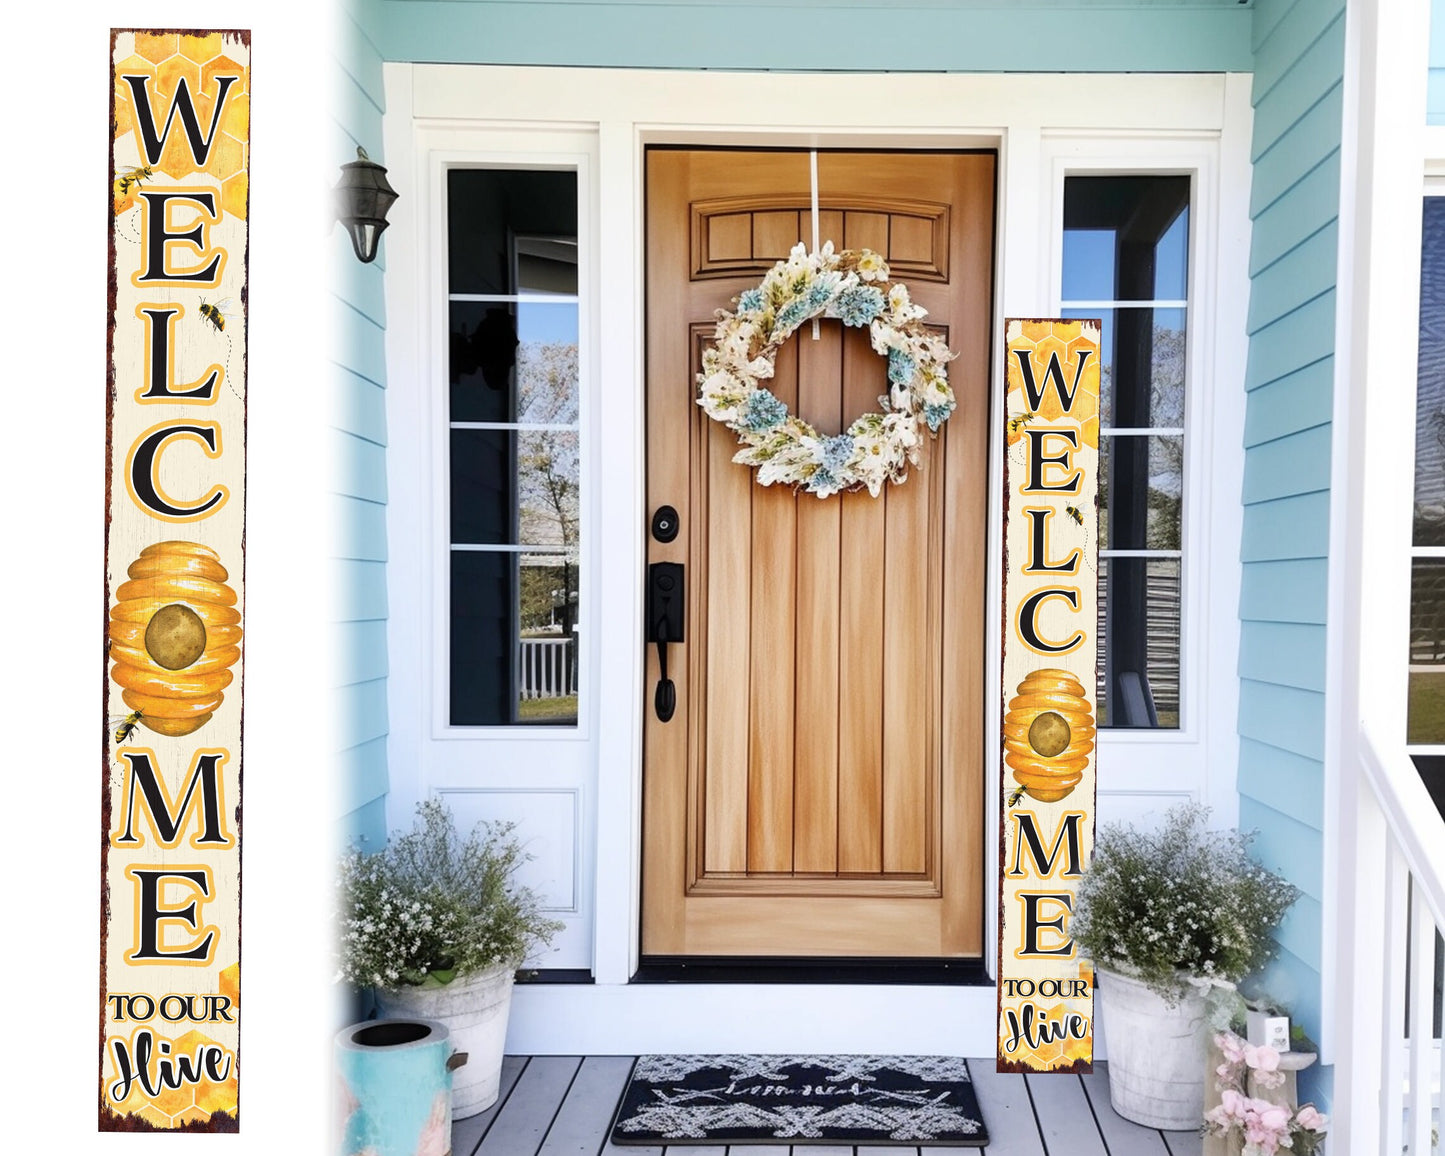 72in "Welcome to Our Hive" Summer Porch Sign | Bee-Themed Home Decor | Perfect for Living Room, Entryway, Mantle, Porch, Front Door